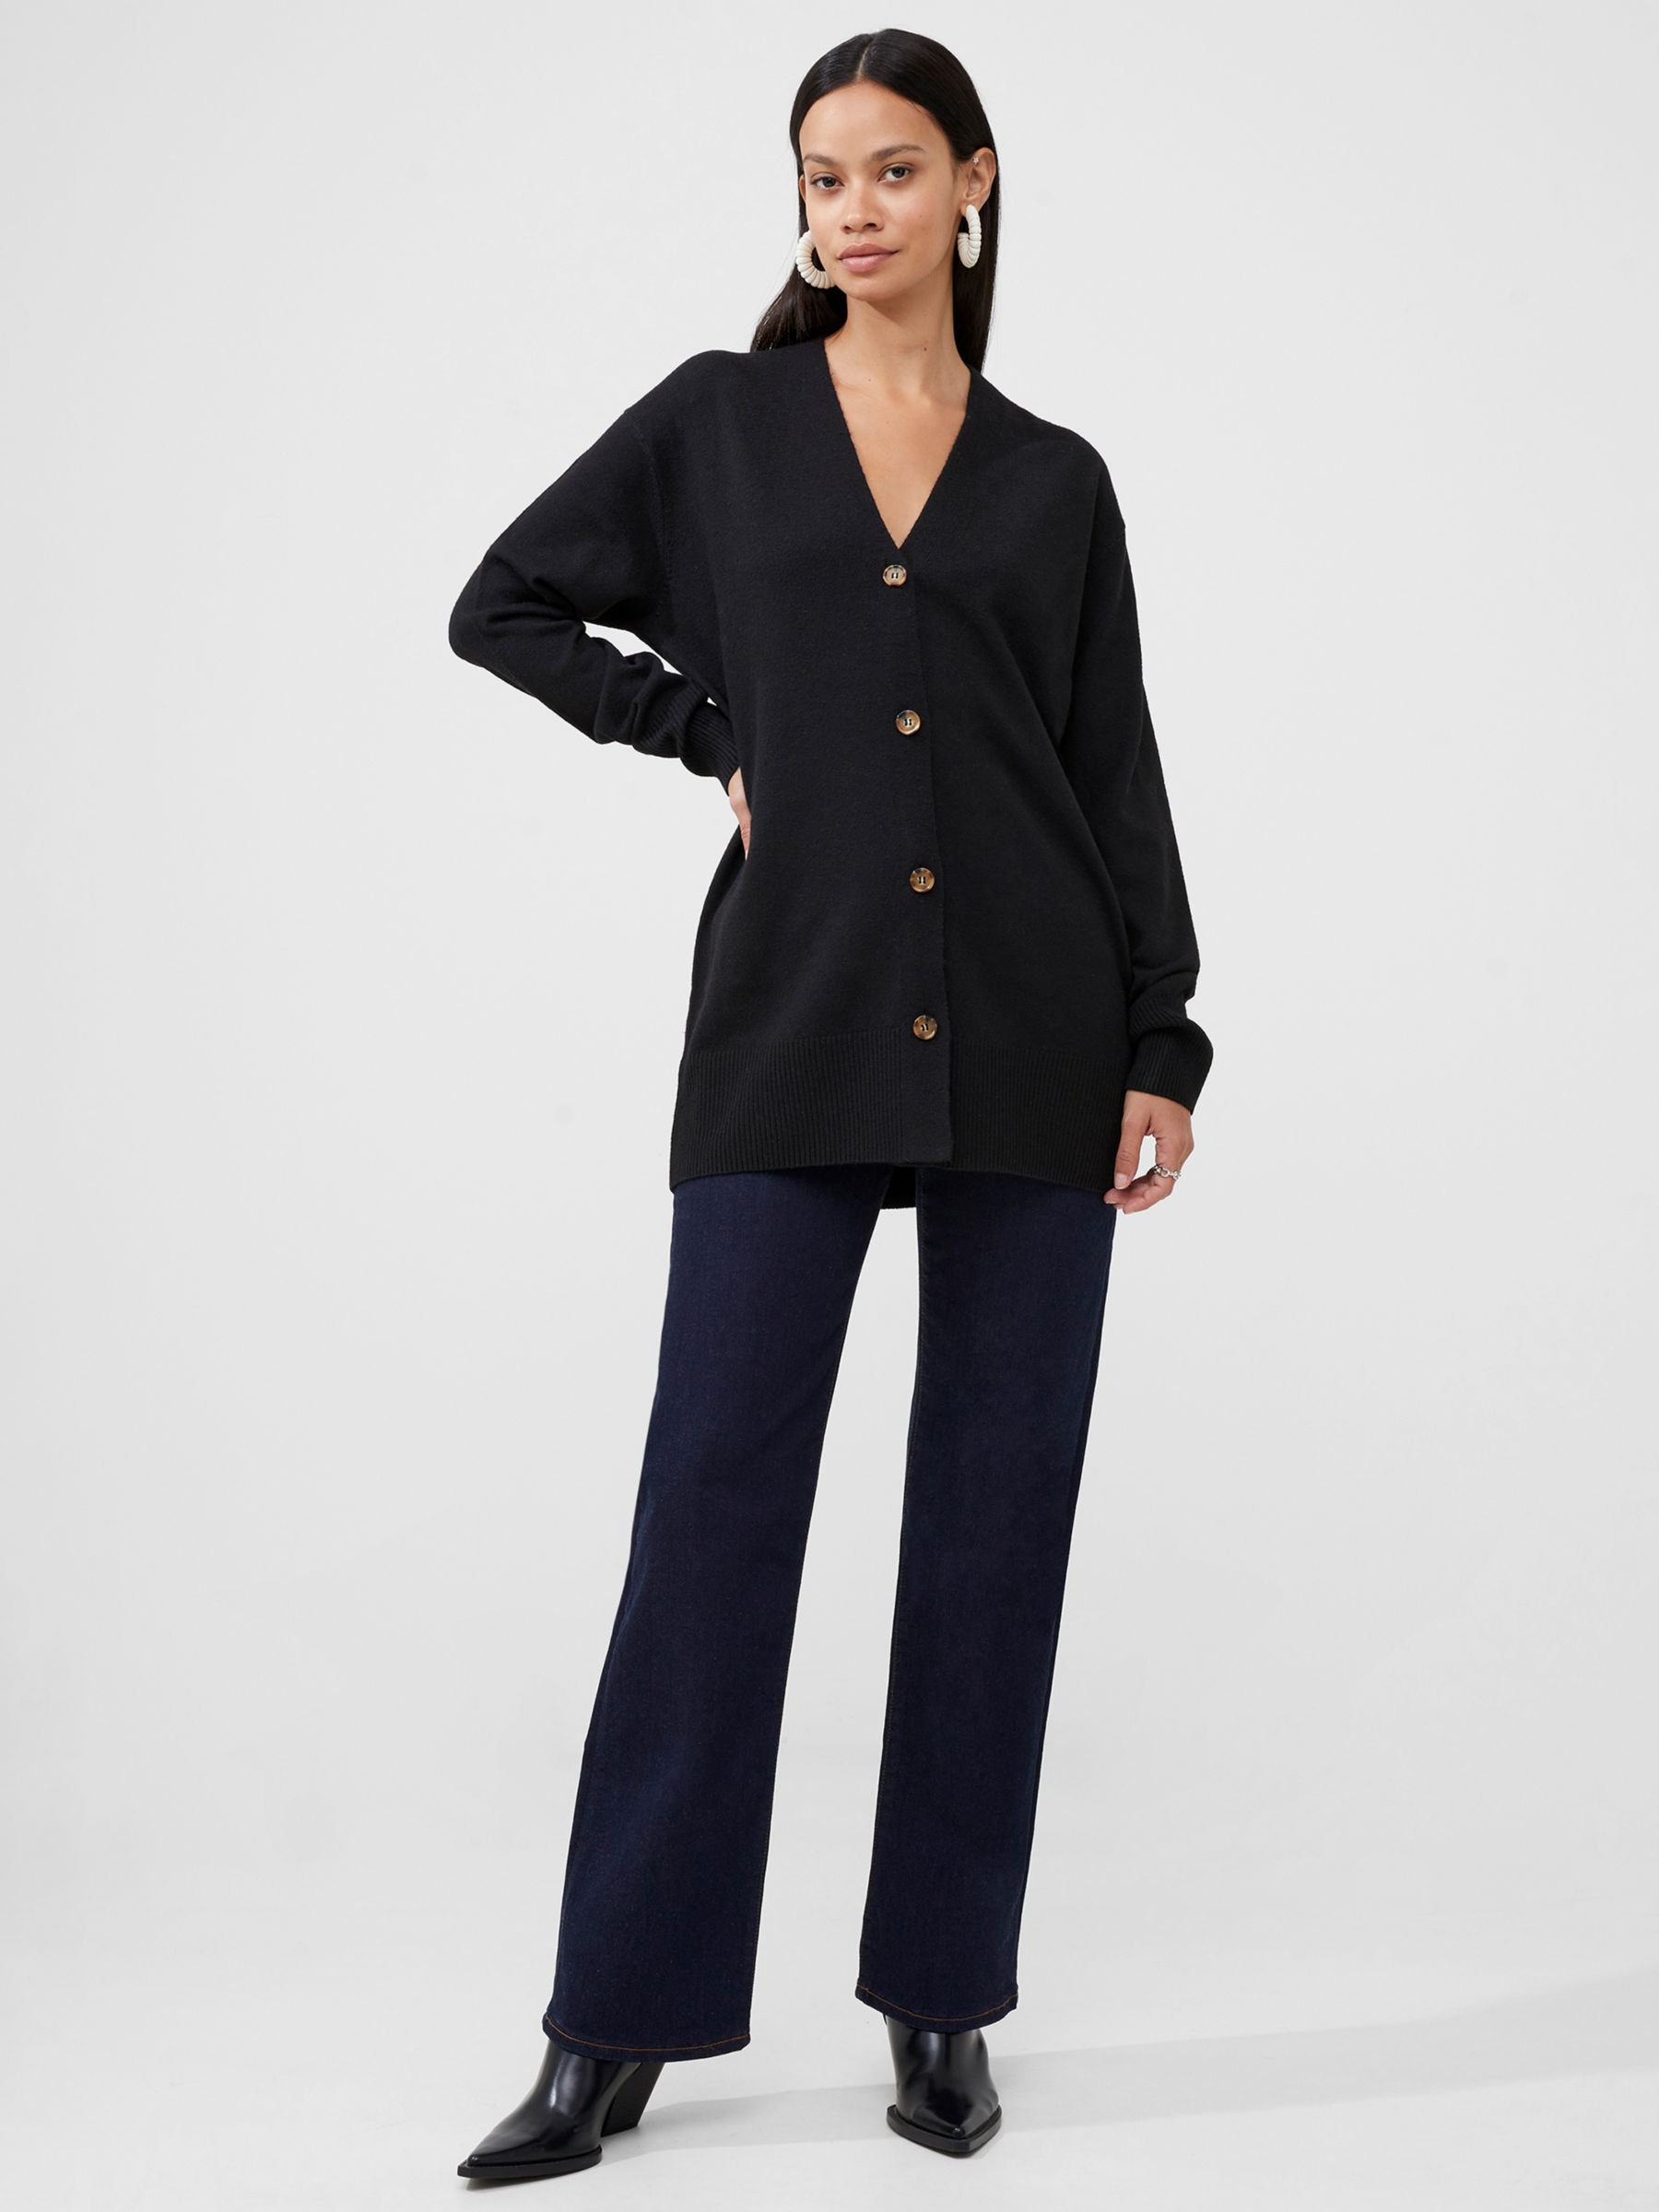 French Connection Vhari Knit Cardigan, Blackout, XS